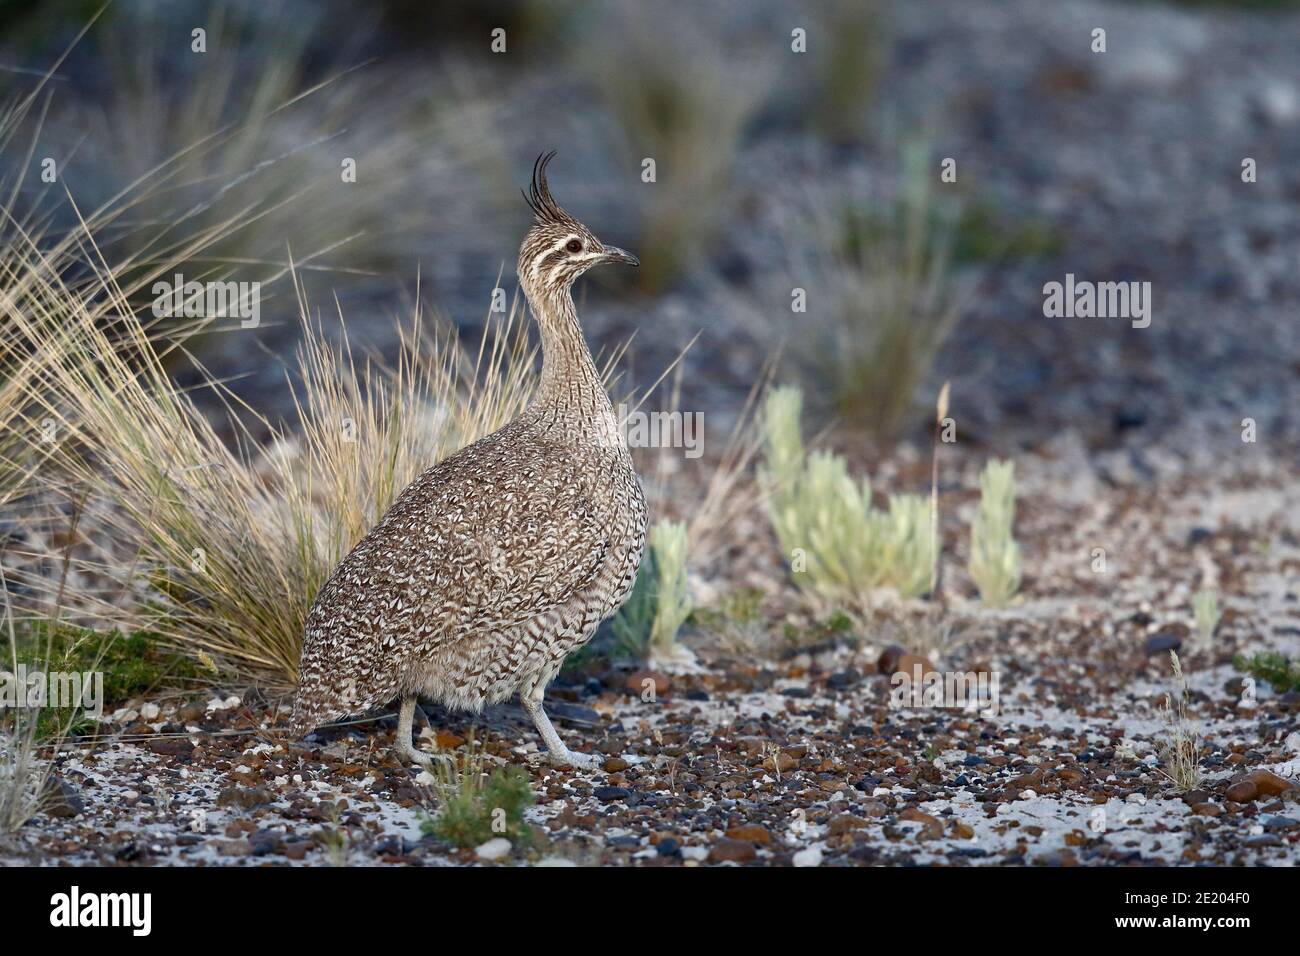 Elegant-crested Tinamou (Eudromias elegans), adult standing near grassy tufts, Peninsula Valdes, Chubut Province, south Argentina 23rd Nov 2015 Stock Photo